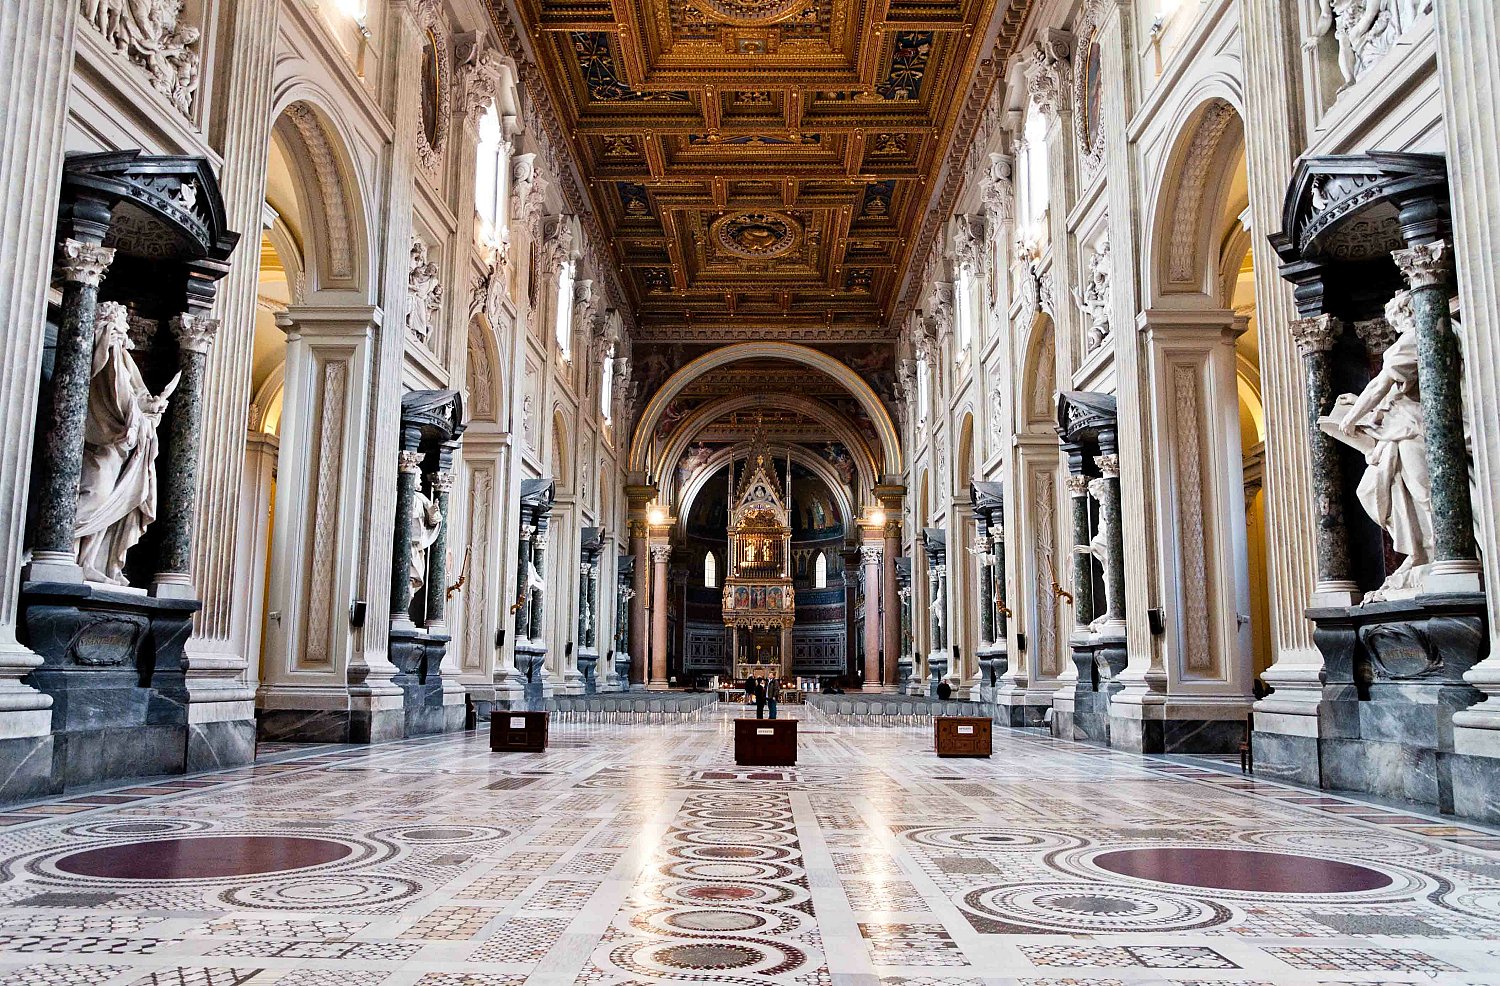 Lateran complex with Audio guide: Basilica, Cloister, Baptistery and ...